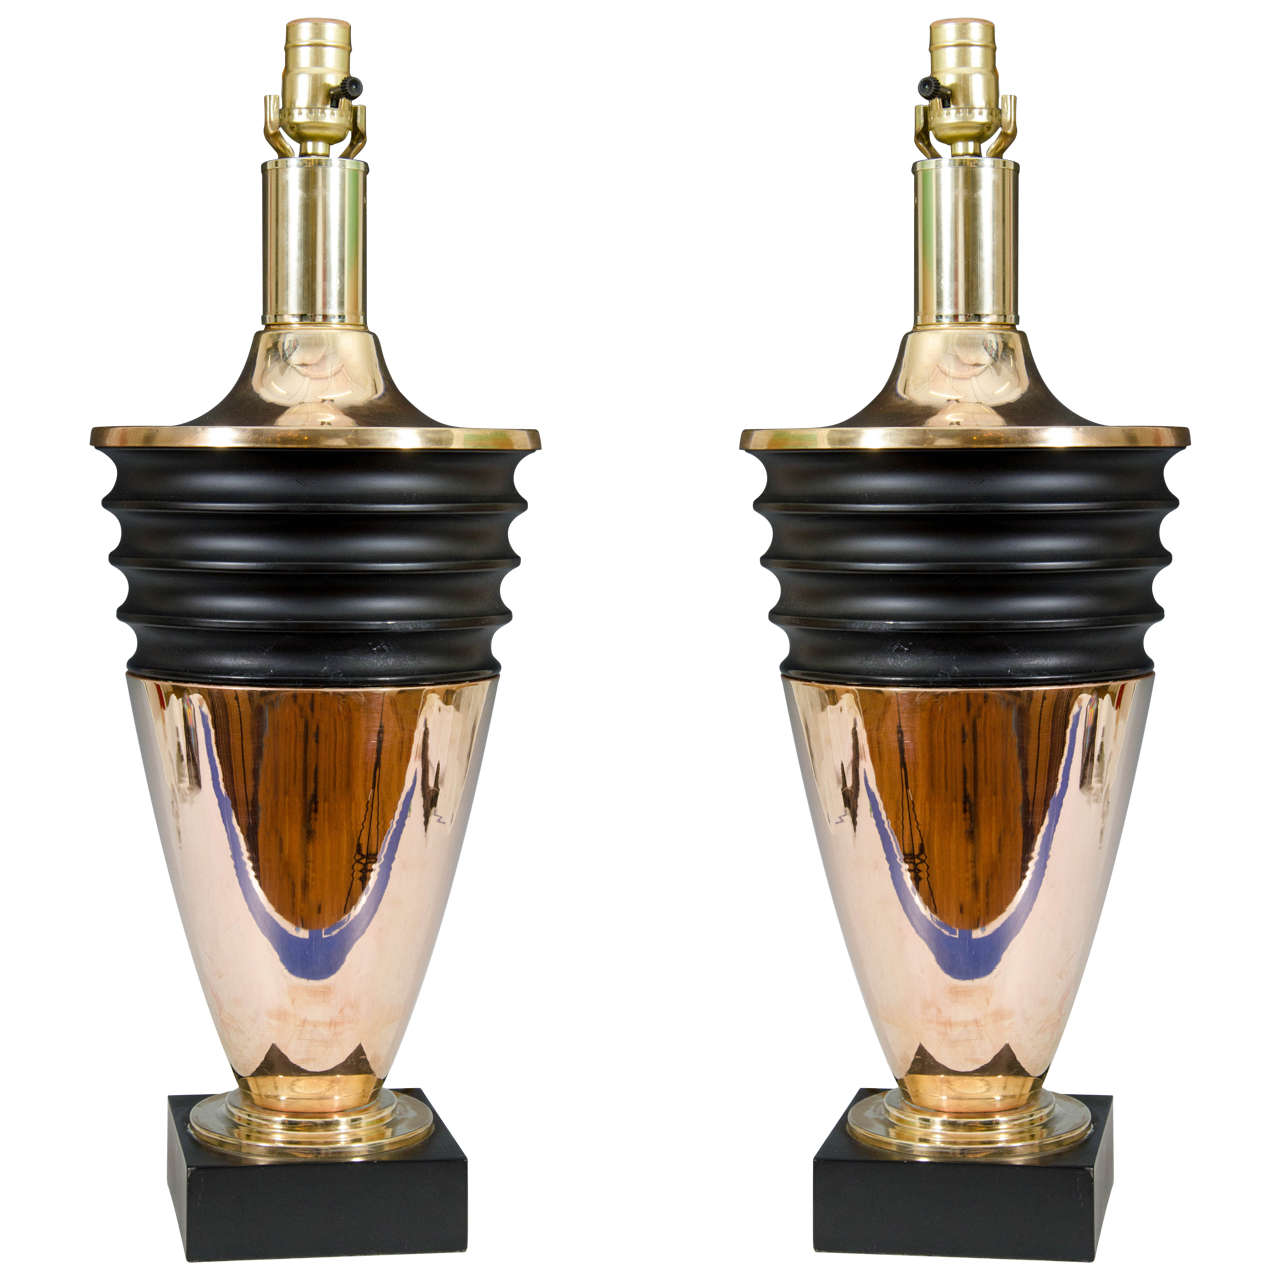 Midcentury Pair of Brass Art Deco Style Table Lamps